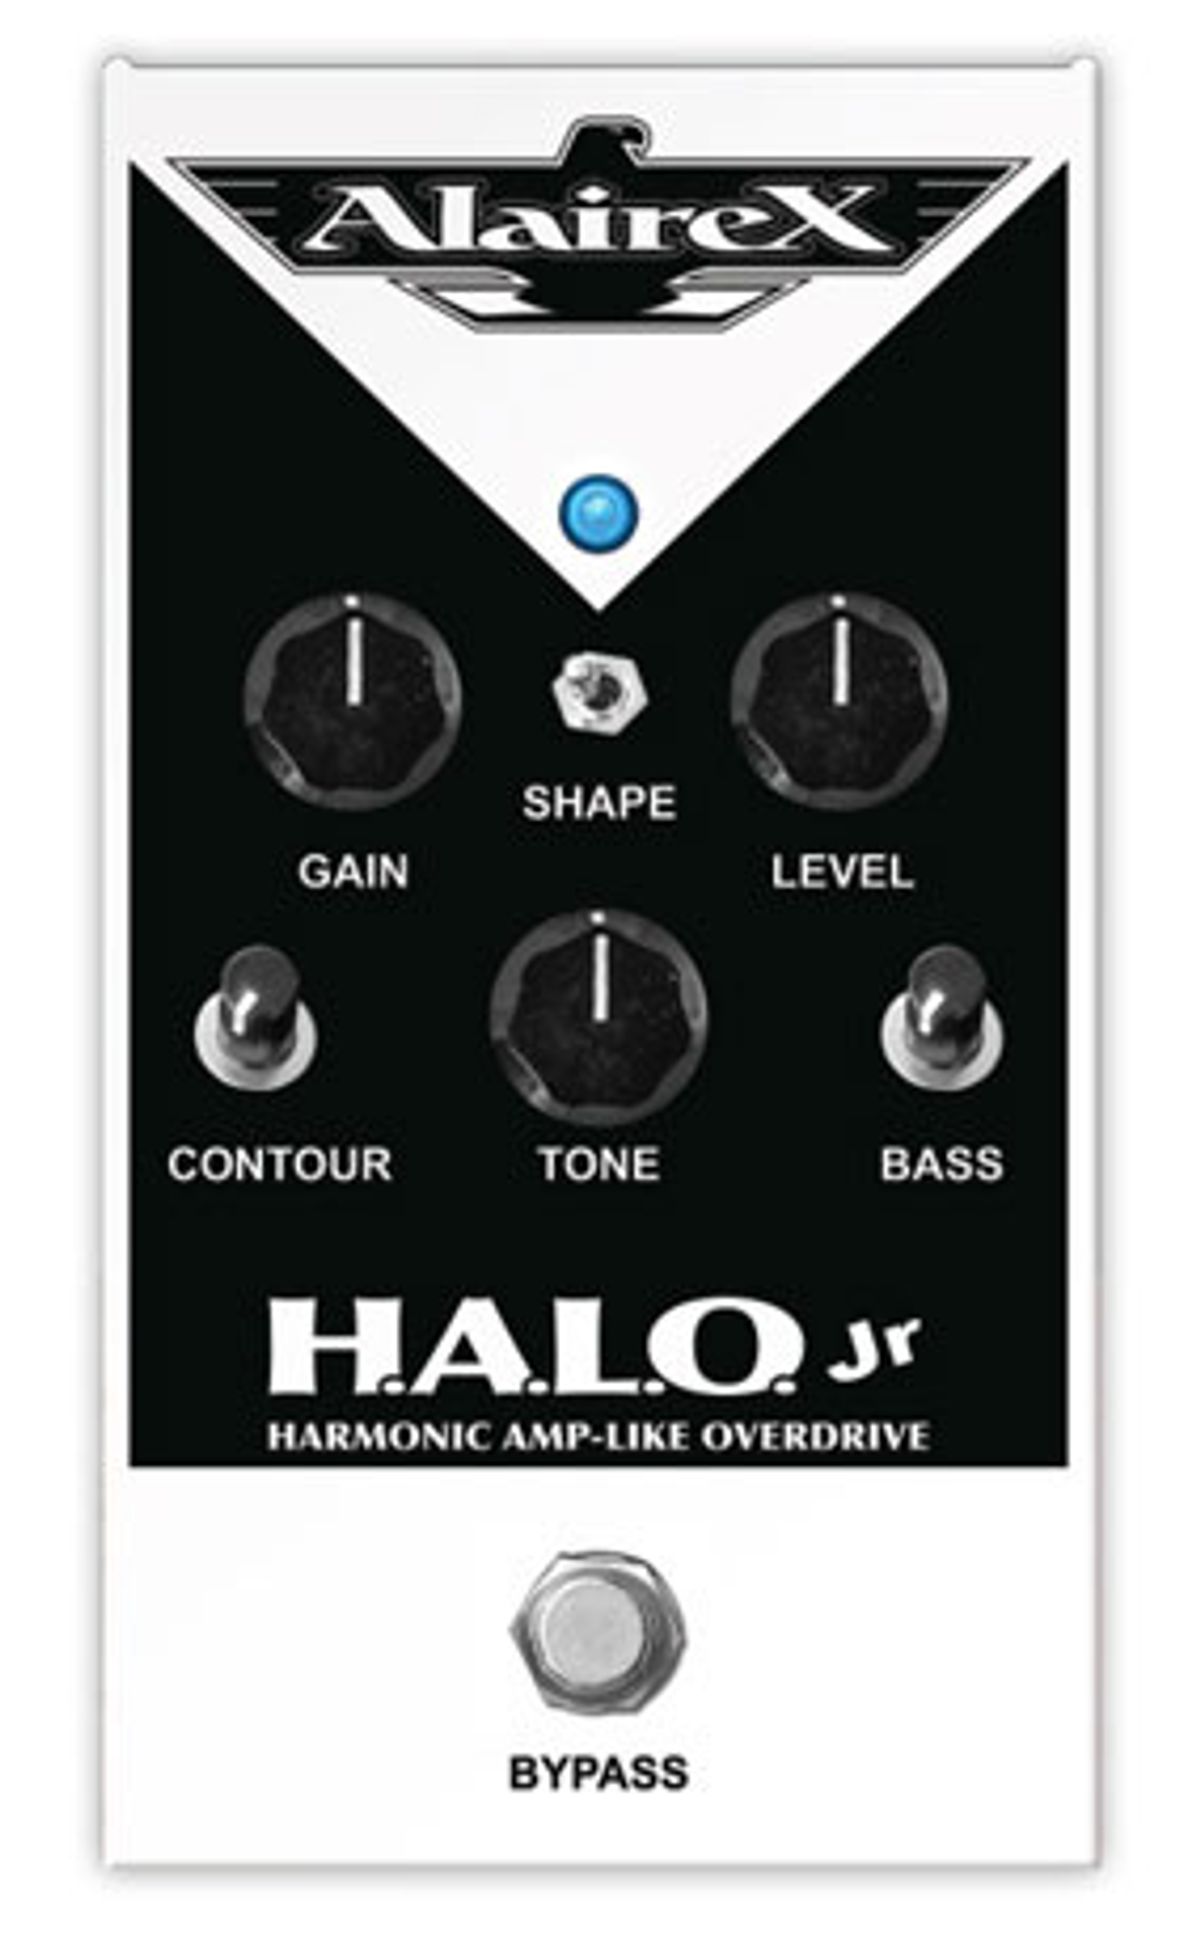 Alairex Releases the H.A.L.O. Jr. Overdrive Pedal